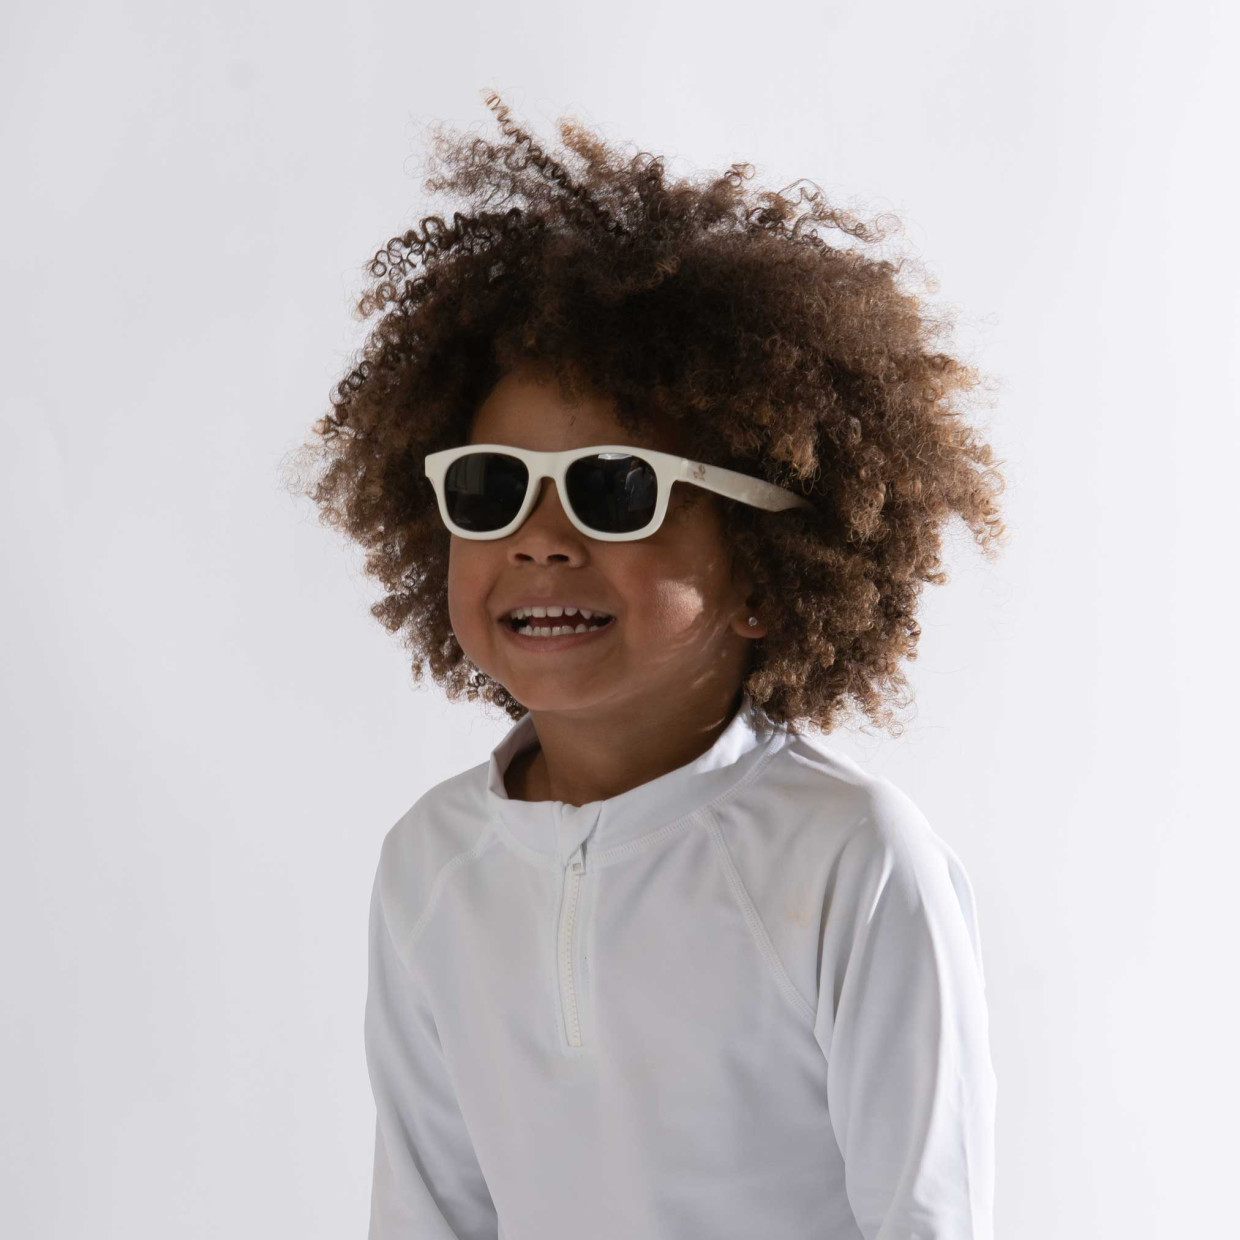 GREEN SPROUTS Sprout Ware Flexible Sunglasses - White, 0-24 Months.